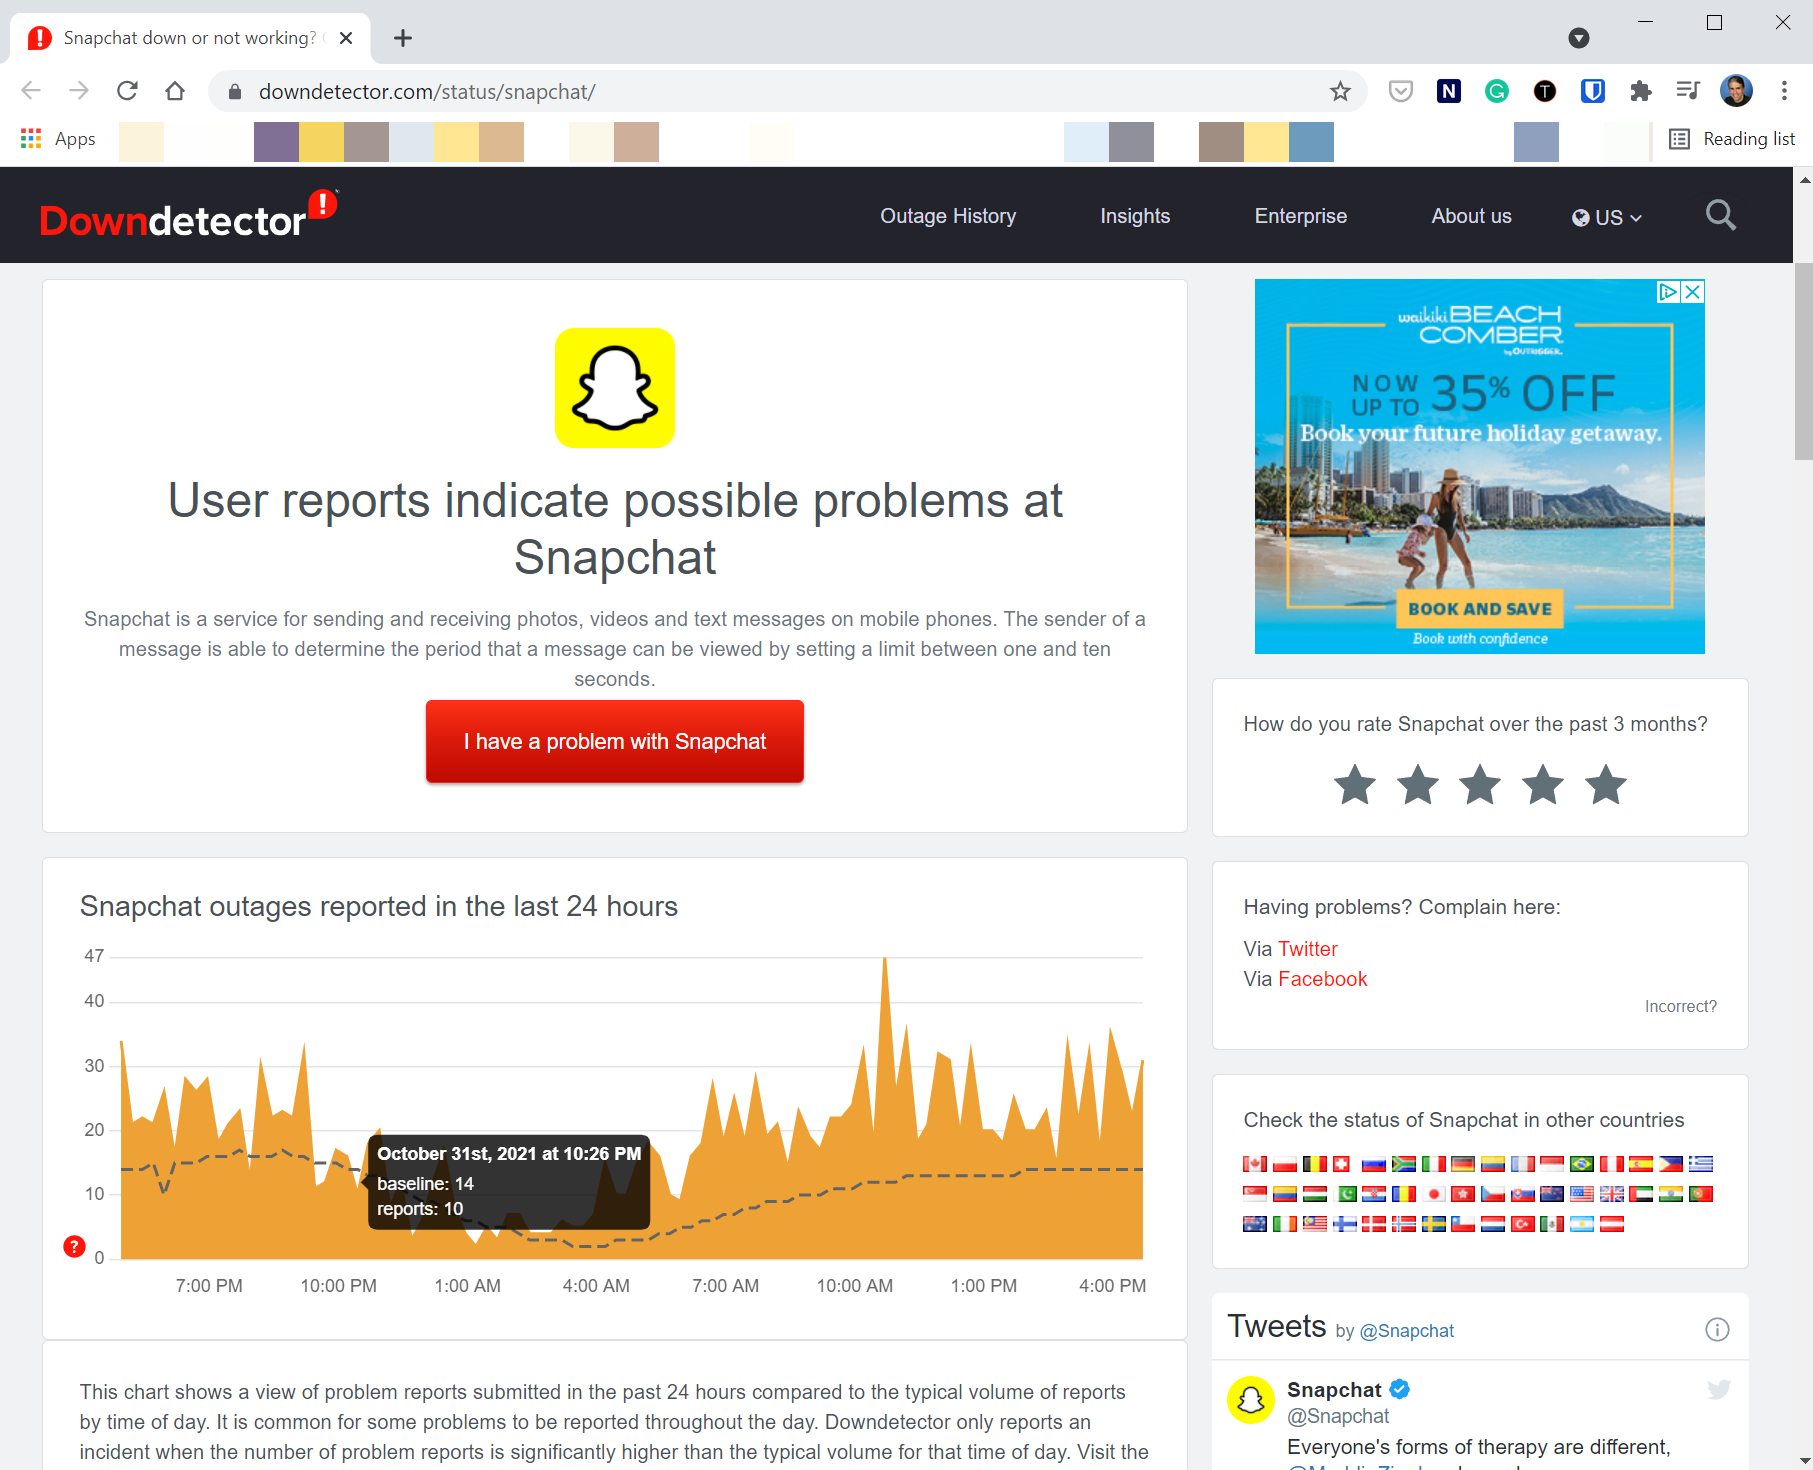 Snapchat DownDetector page in Chrome.